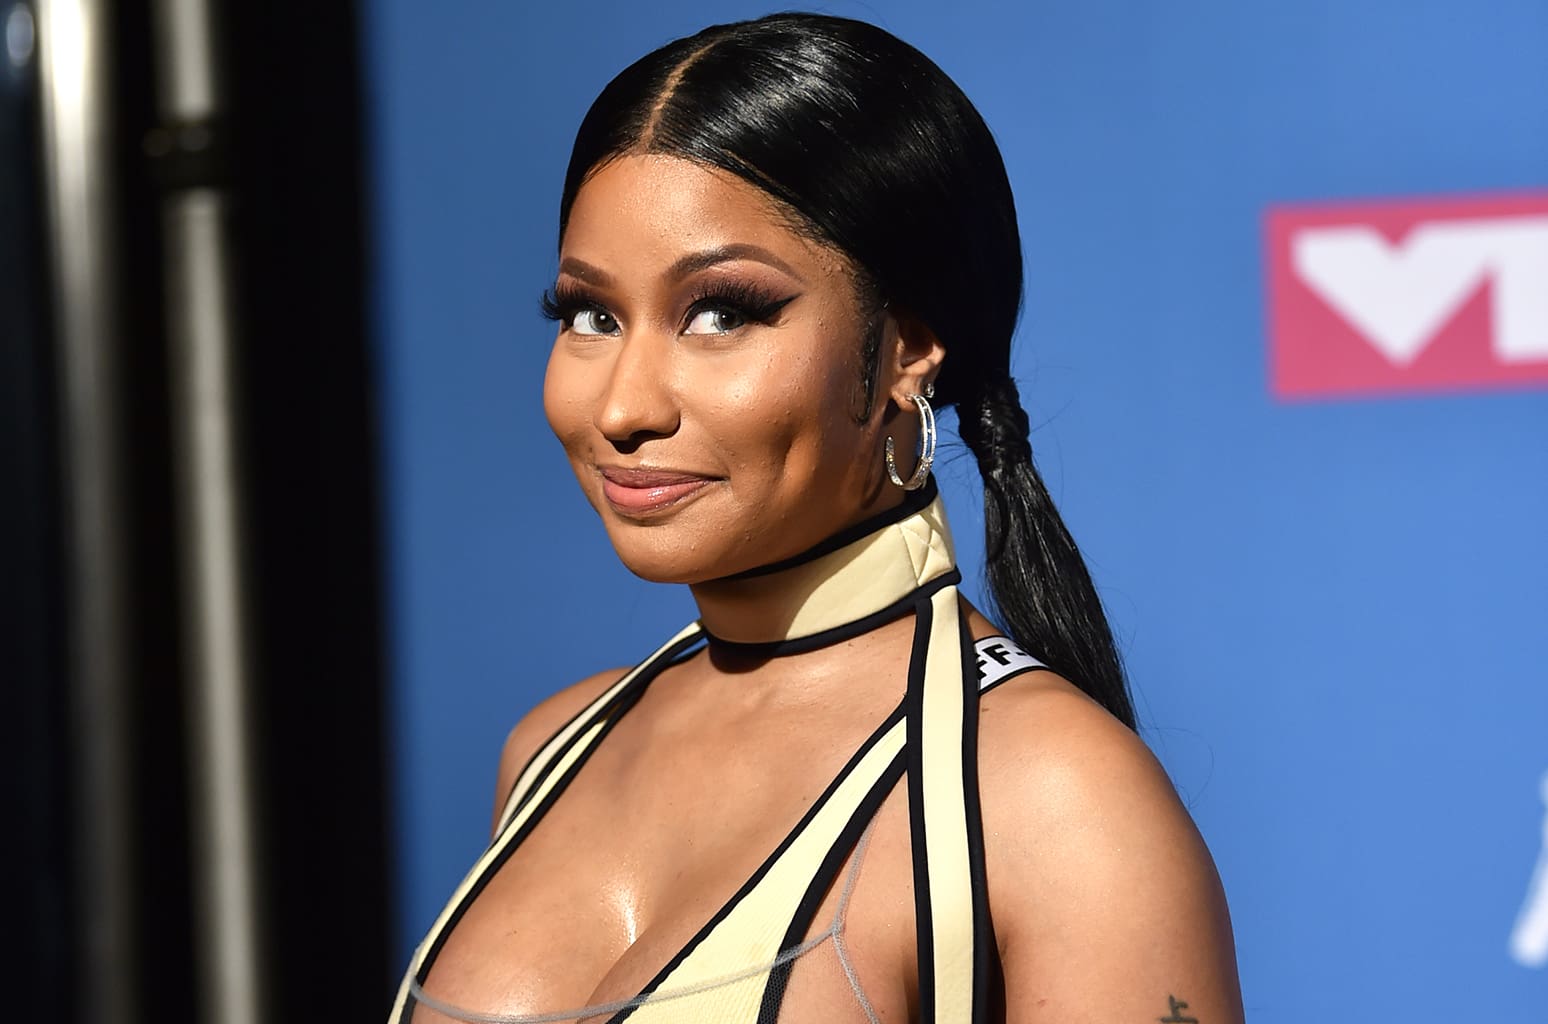 Nicki Minaj Has Baby Fever: ‘I’m Obsessed With Babies’ – Is She Considering ...